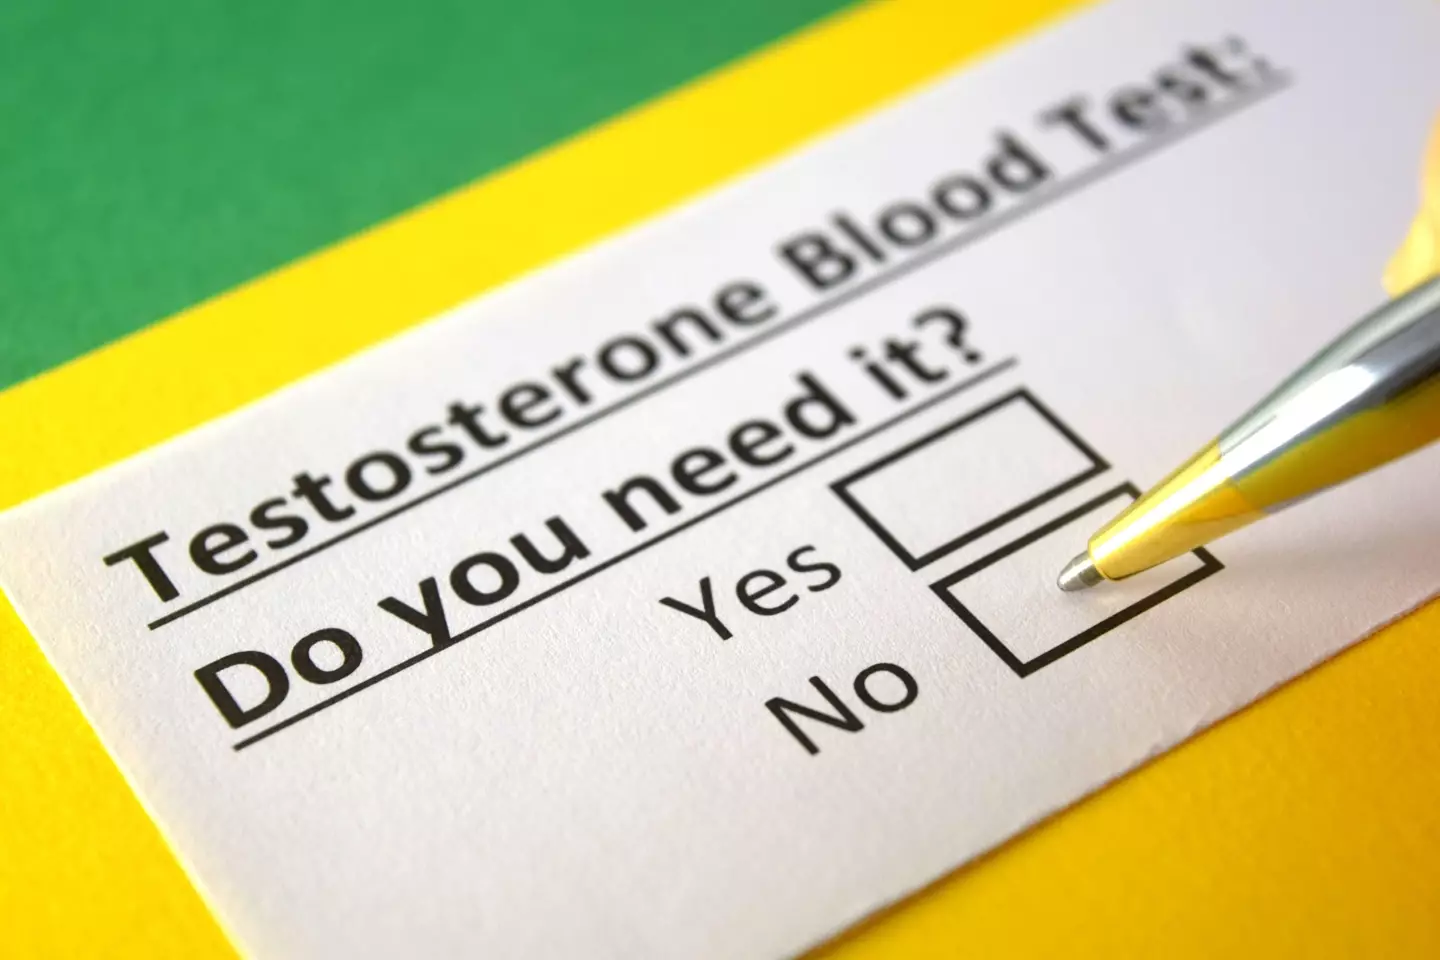 Simon discovered he had testosterone deficiency by doing a simple blood test.